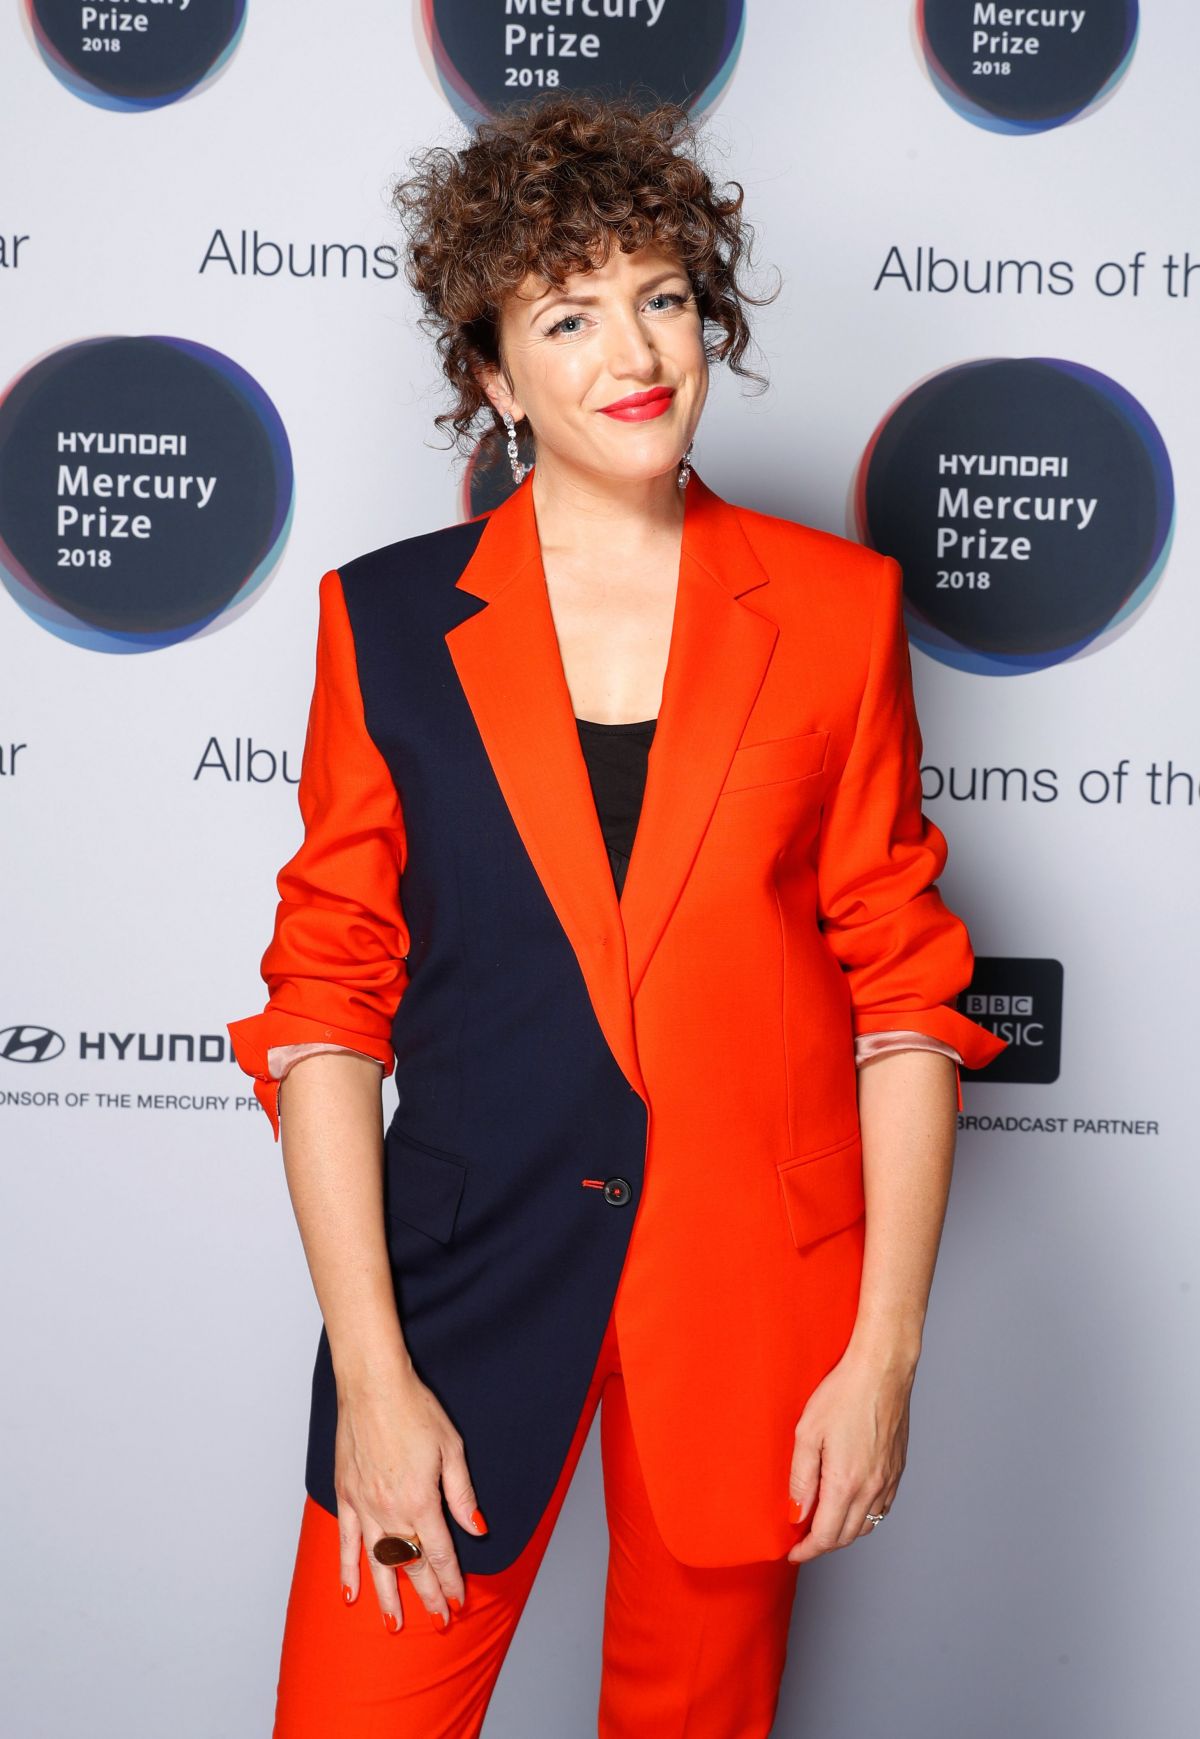 ANNIE MAC at Mercury Prize Albums of the Year Awards in London 09/20